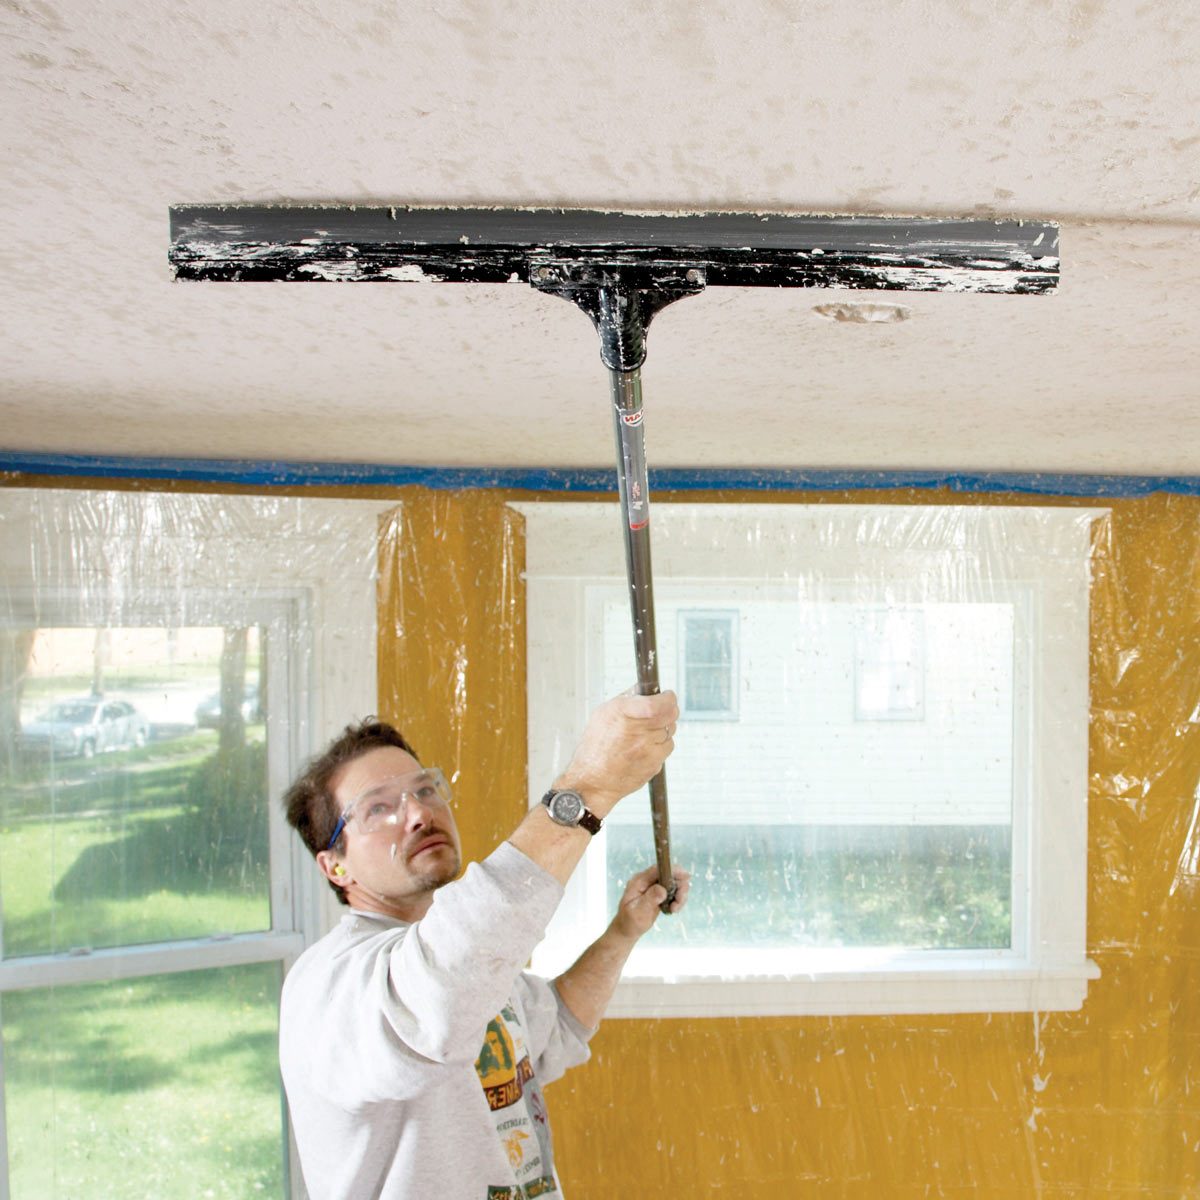 How to use a sponge to match knockdown texture on a ceiling repair